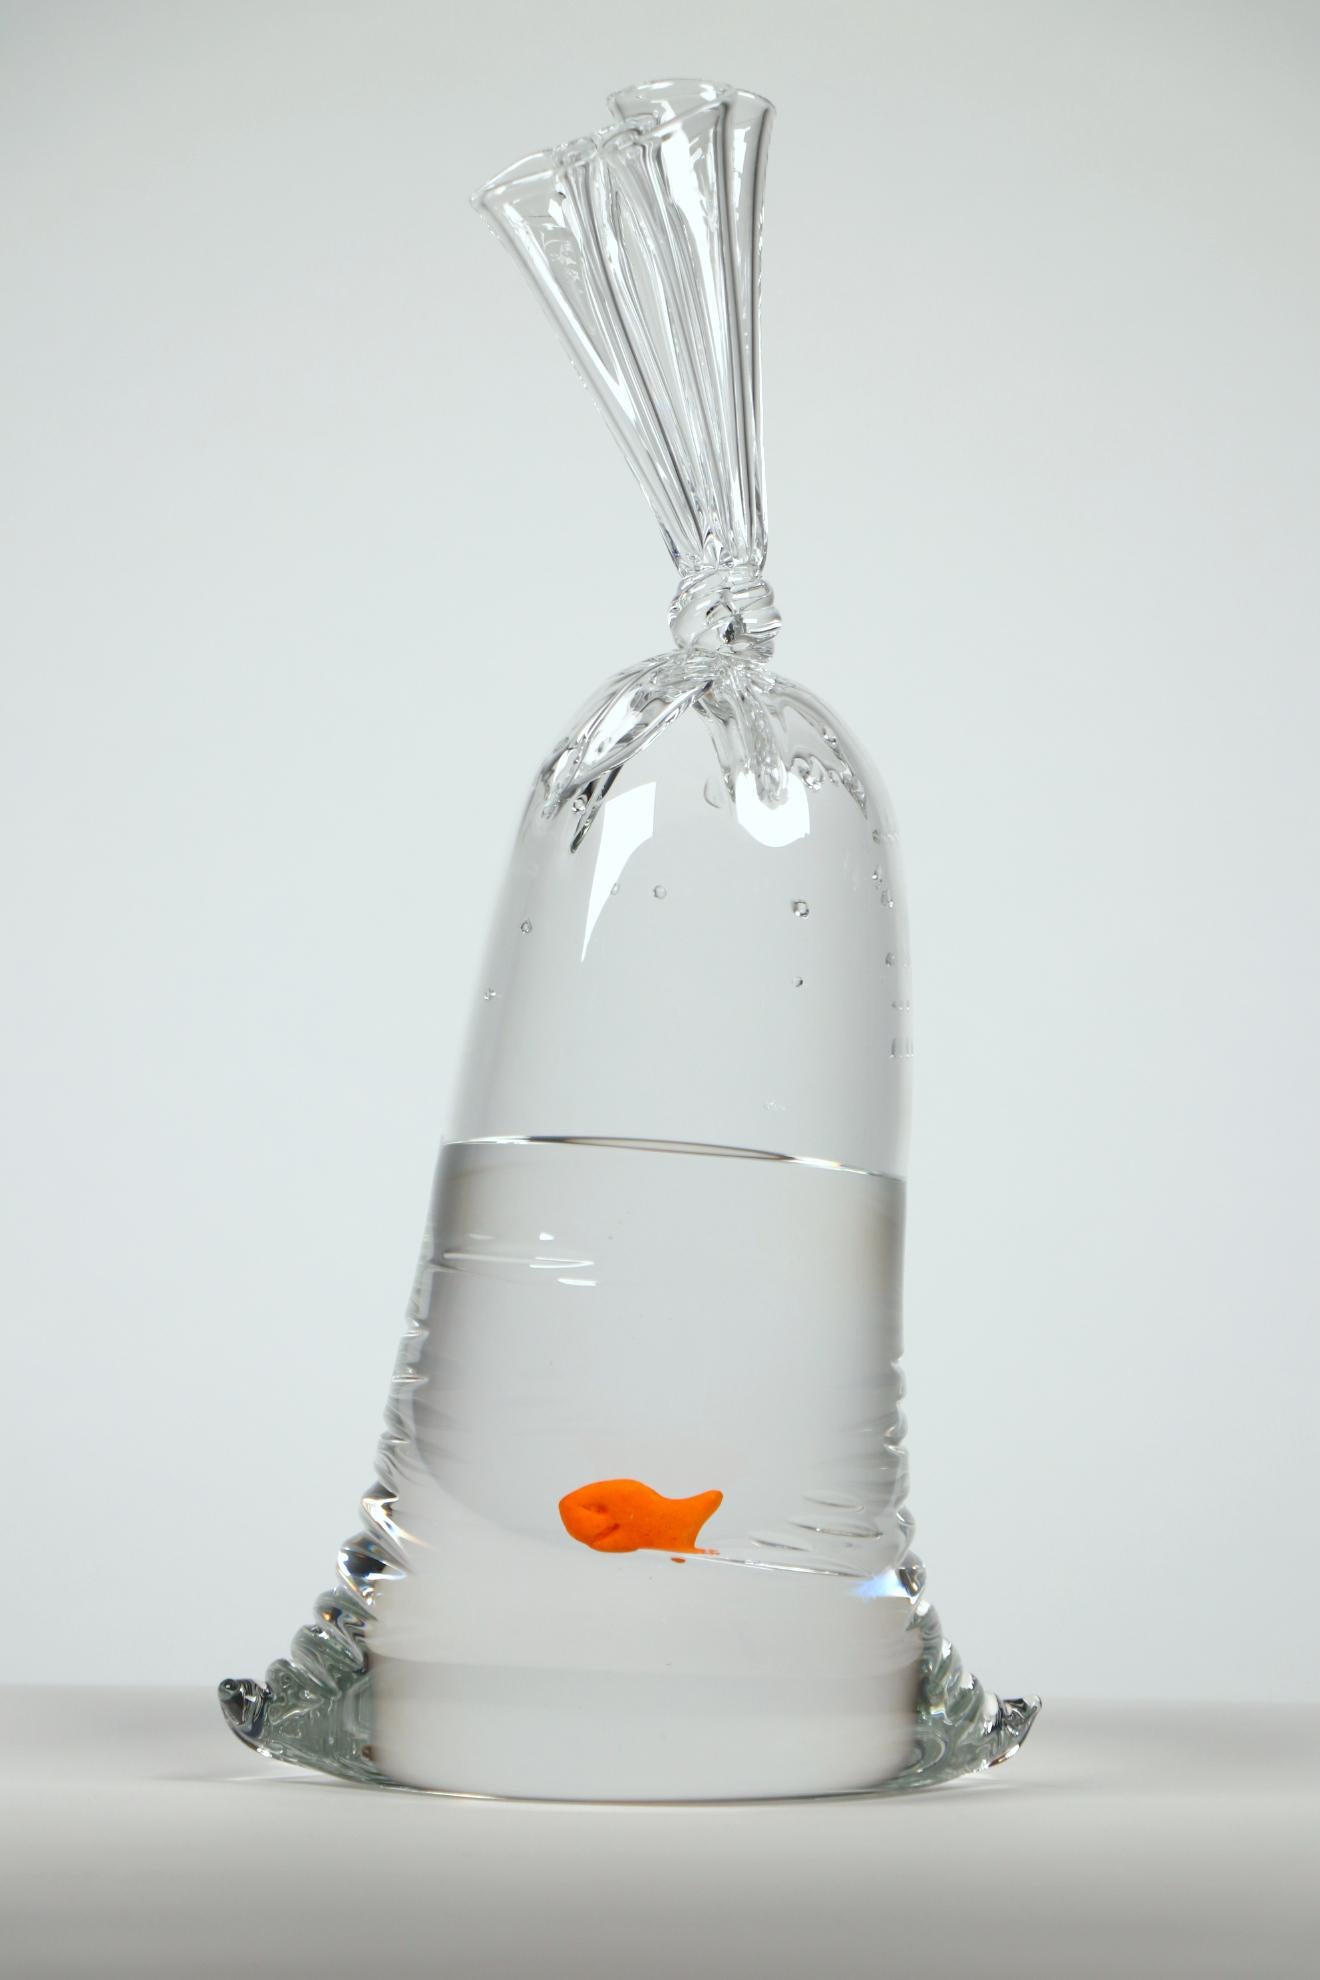 Inspired by popular demand, these limited-edition hyperreal goldfish cracker glass water bags are a playful nod to the carnival goldfish in plastic bags. 

Created with molten glass at over 2000° F, each piece is hand sculpted, signed, and comes